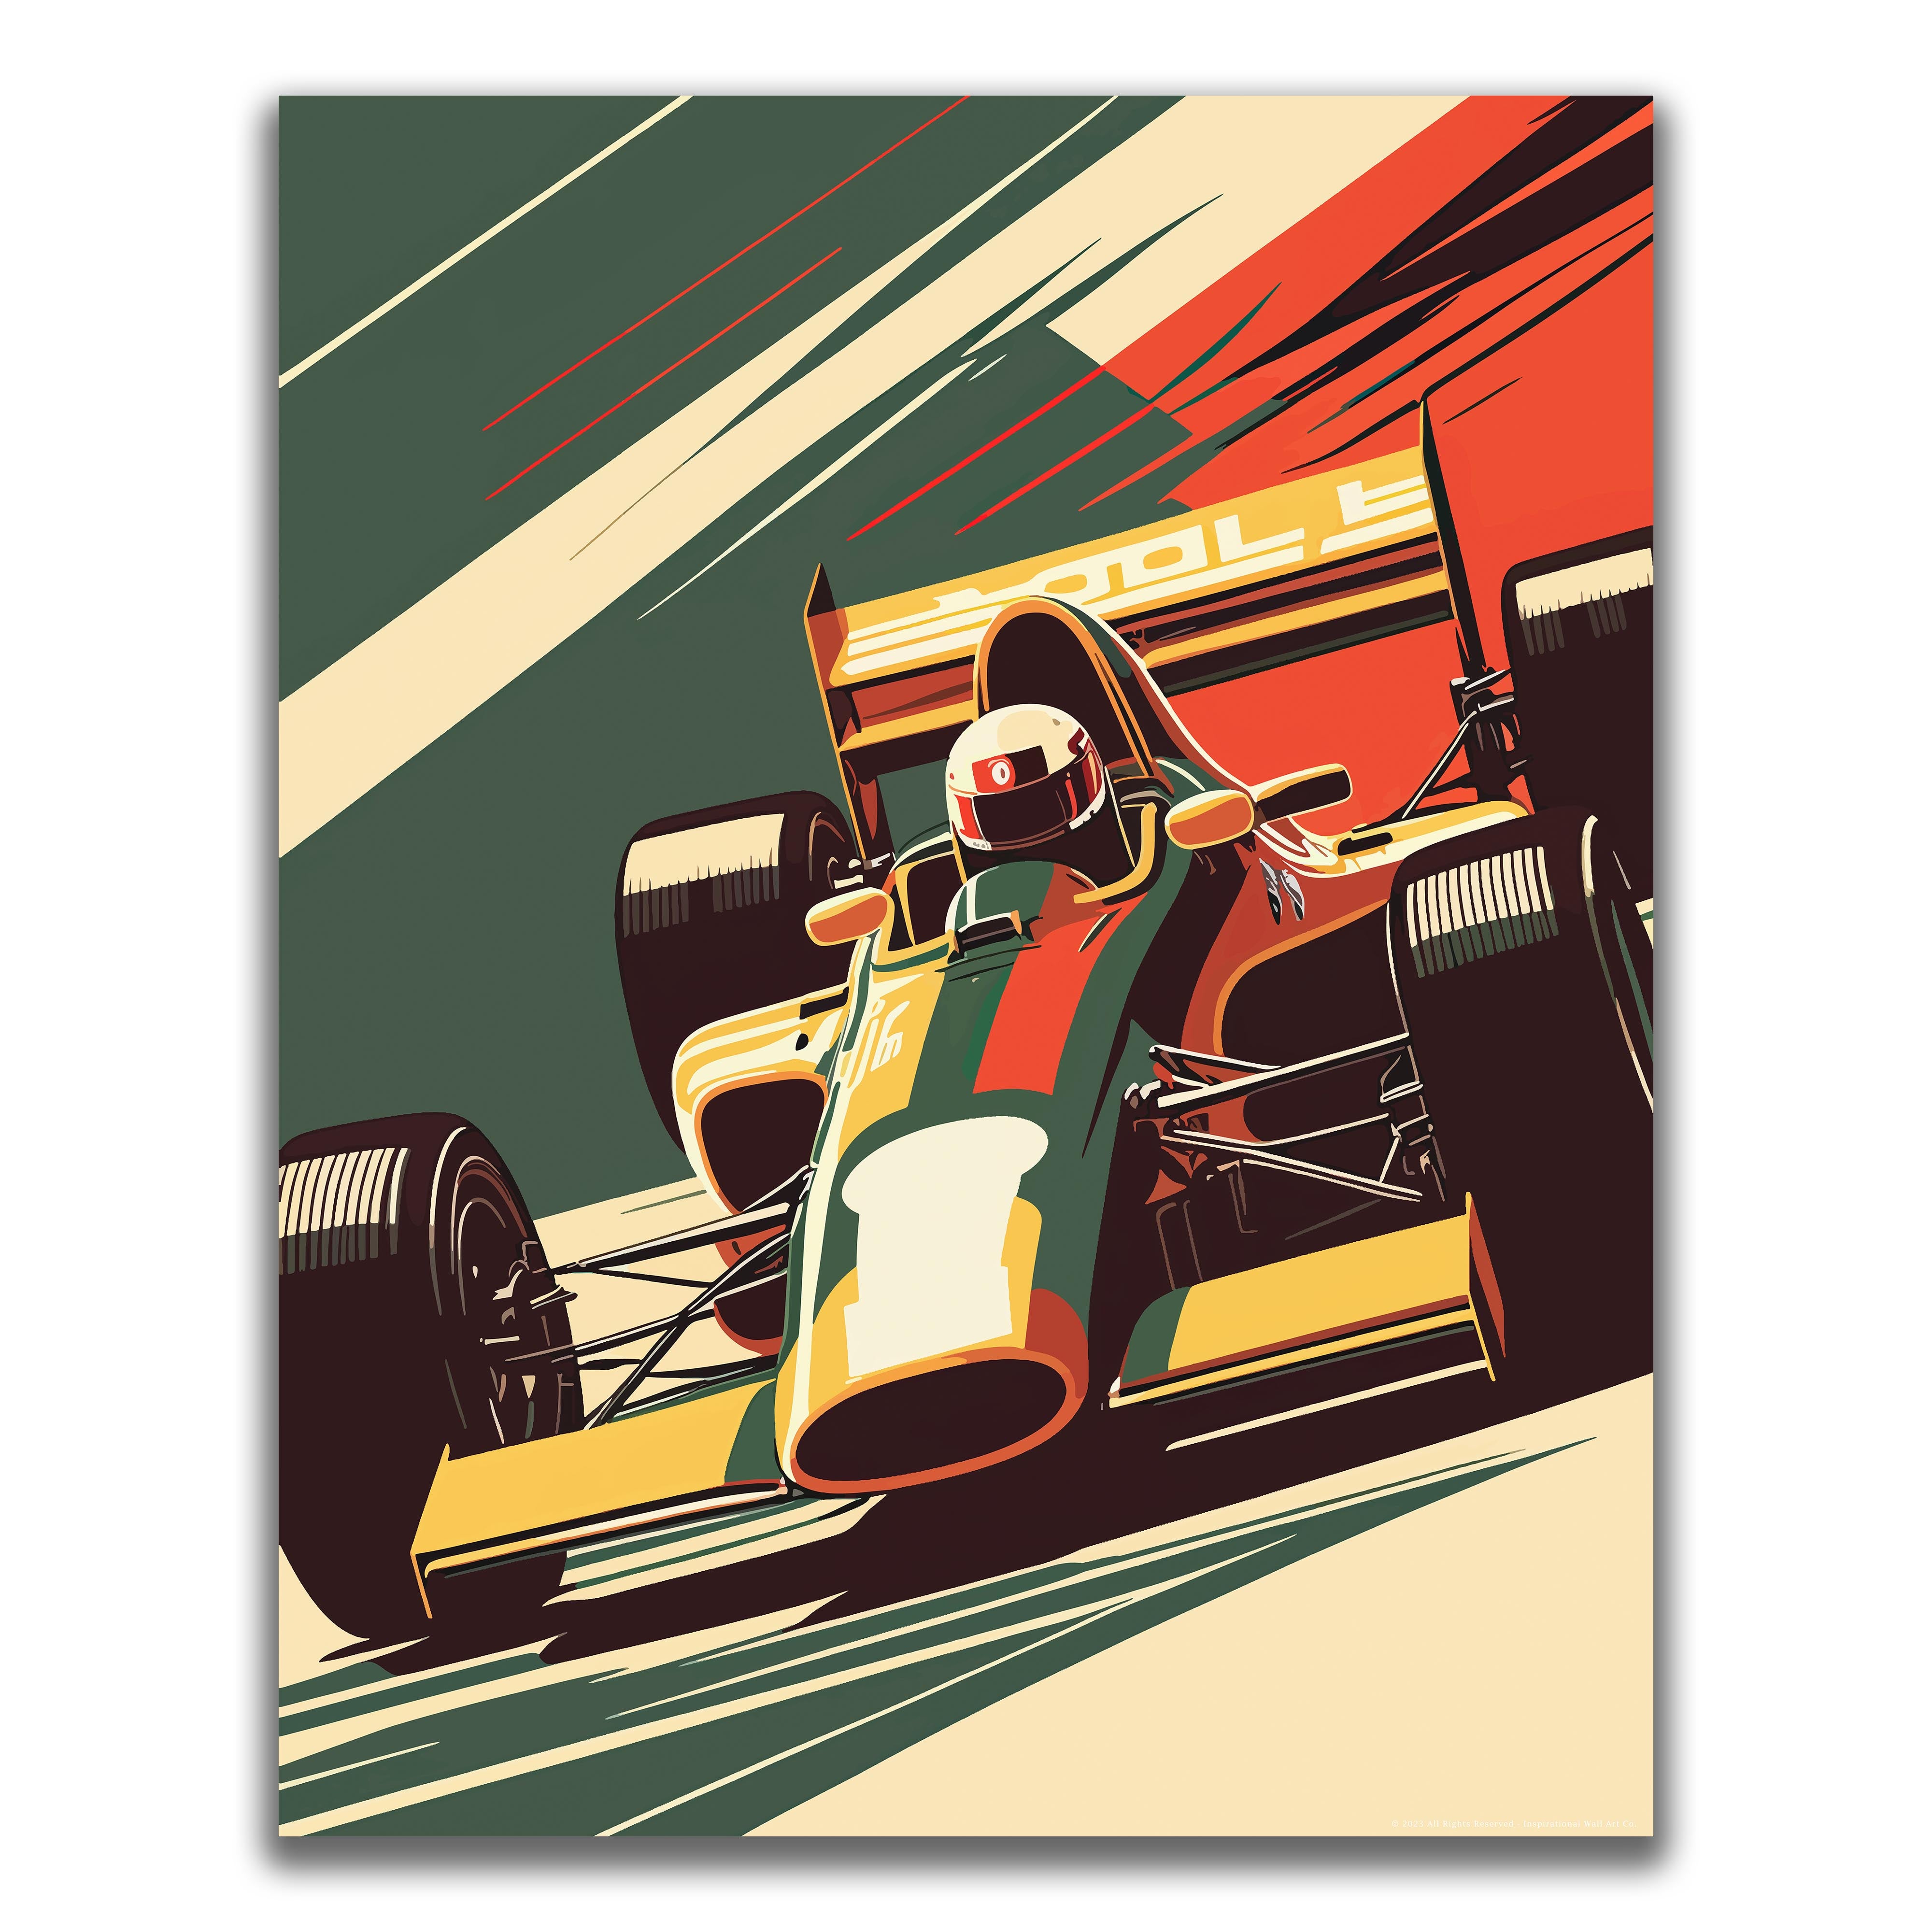 Driven by Passion - Car Poster